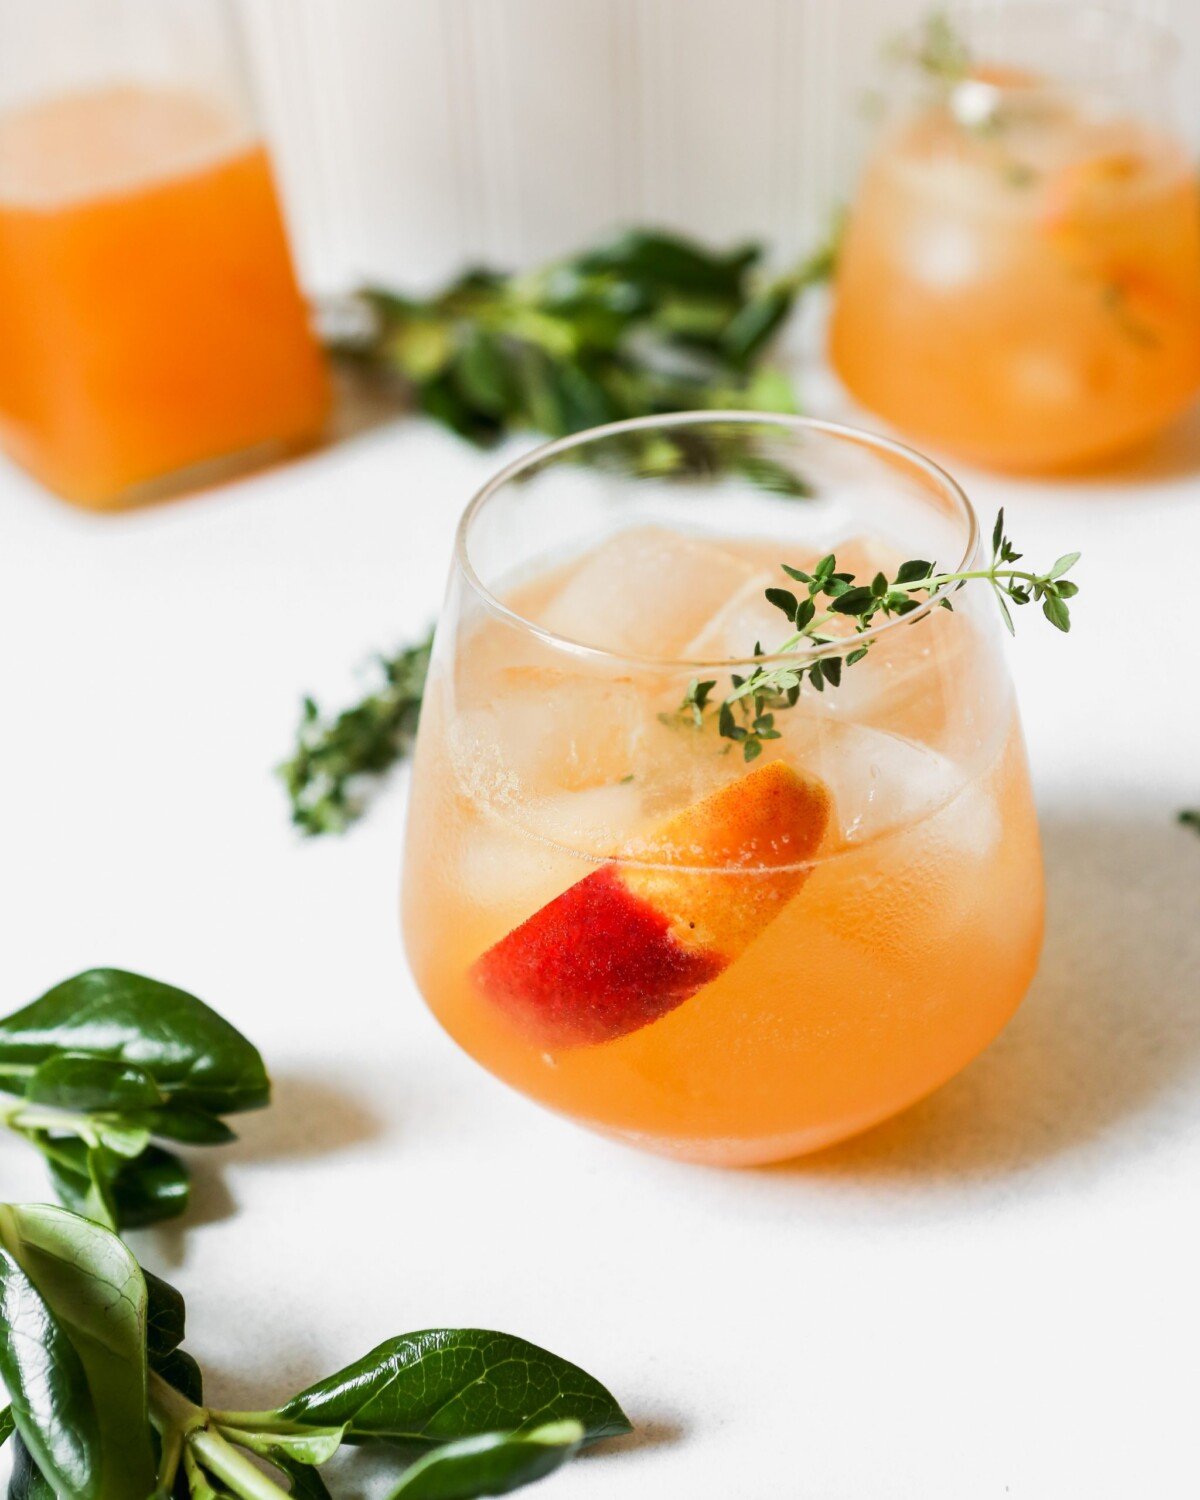 Peach and thyme cocktail photographed from overhead on a white surface. Fresh peach and thyme sprigs arranged around drink.